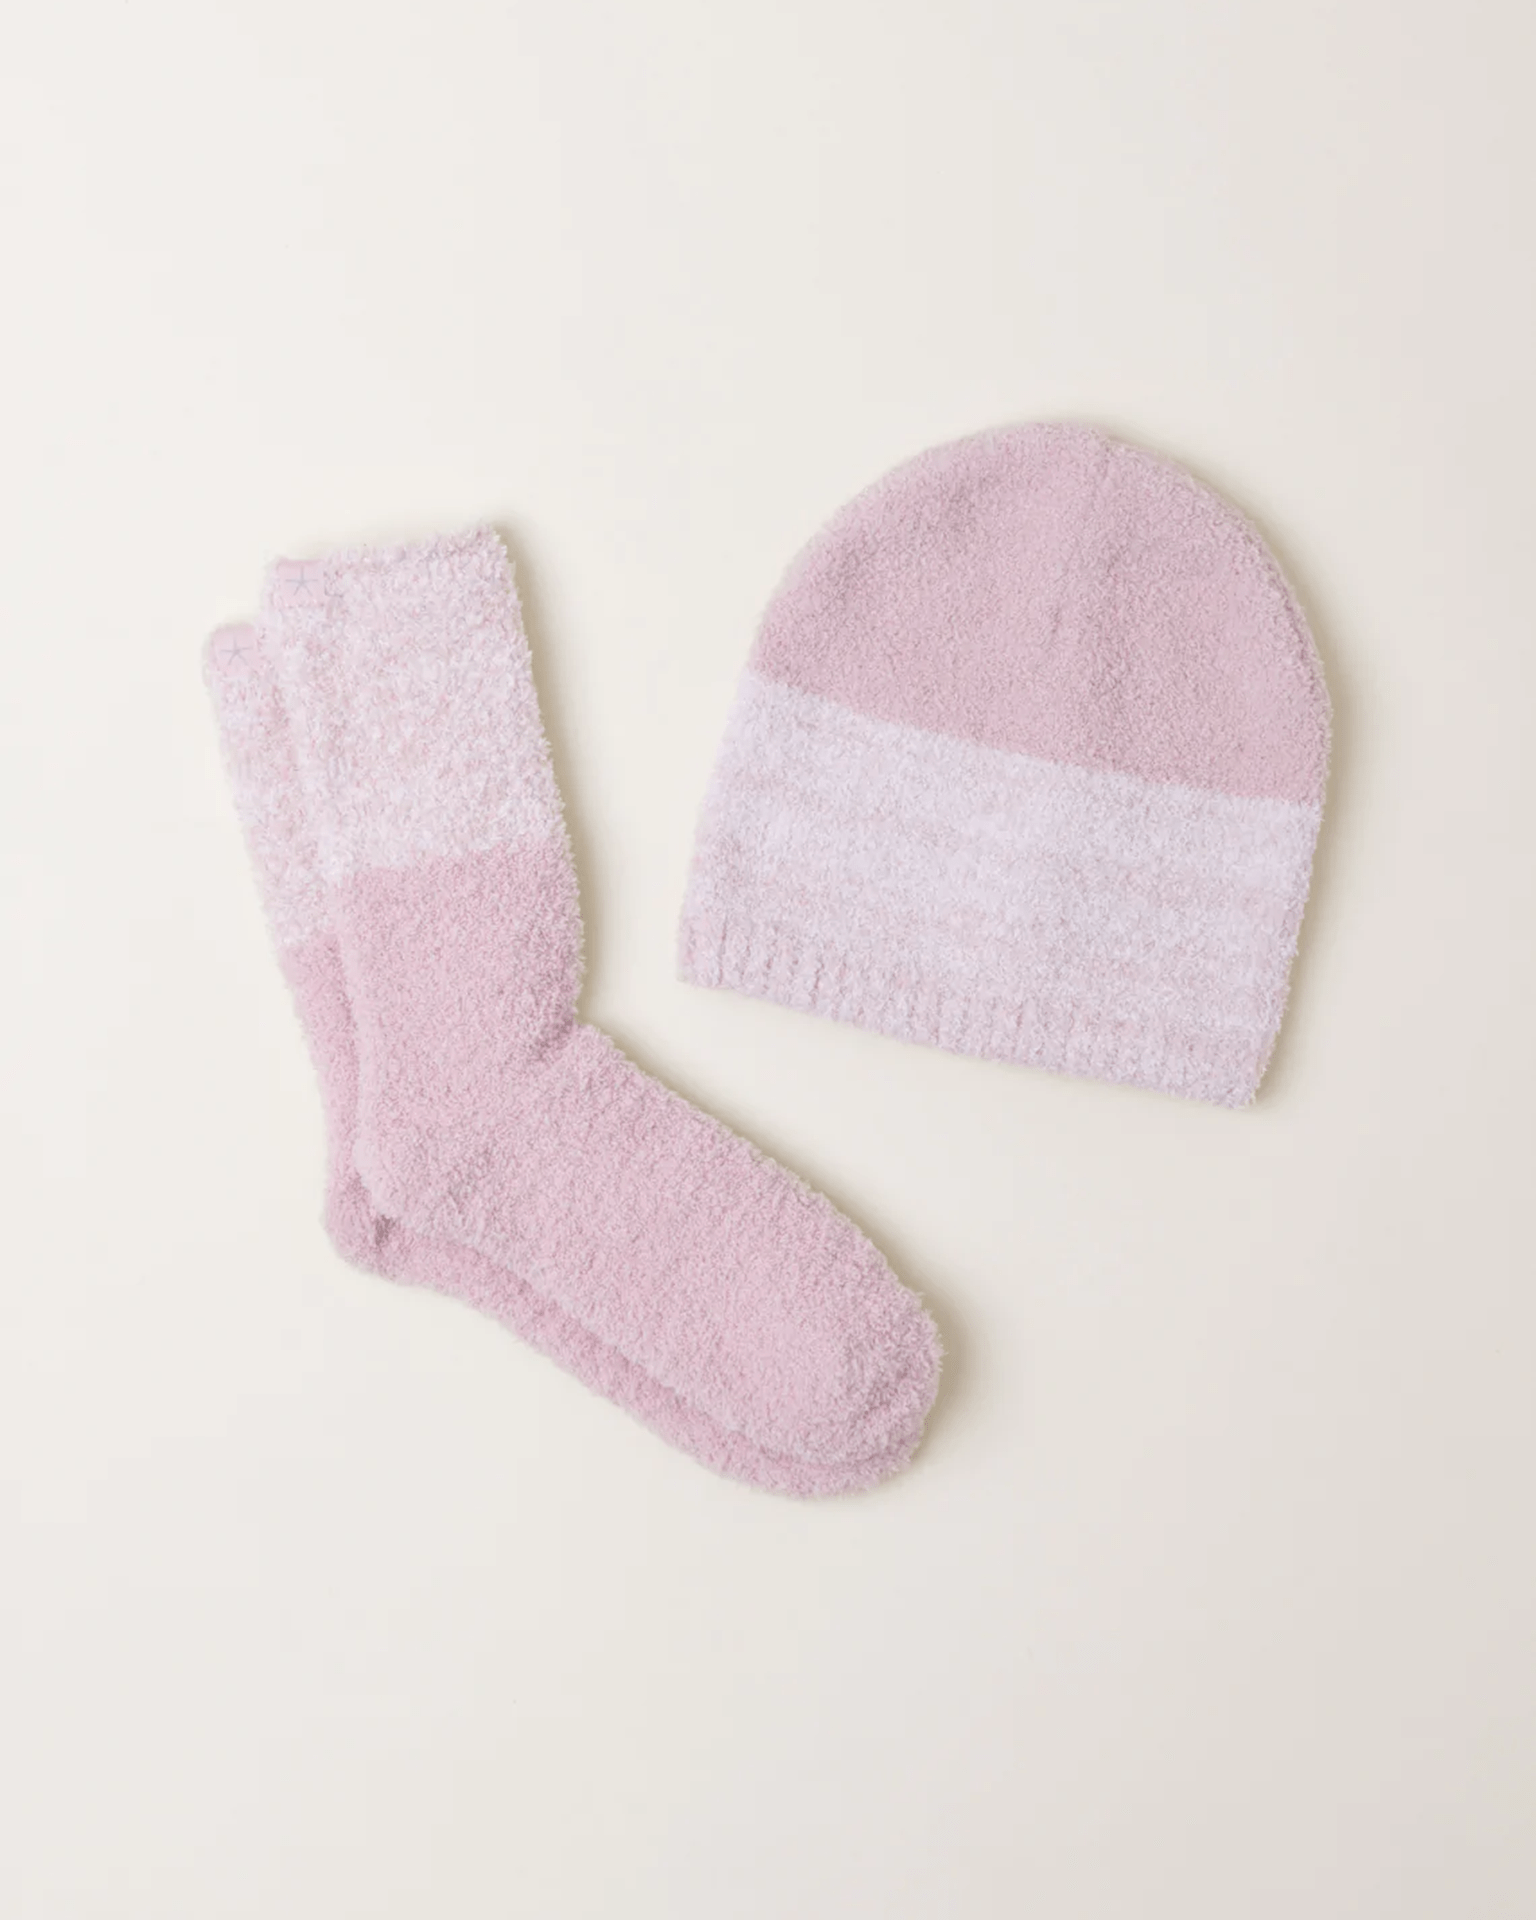 Barefoot Dreams CozyChic Heathered Socks in Dusty Rose/White